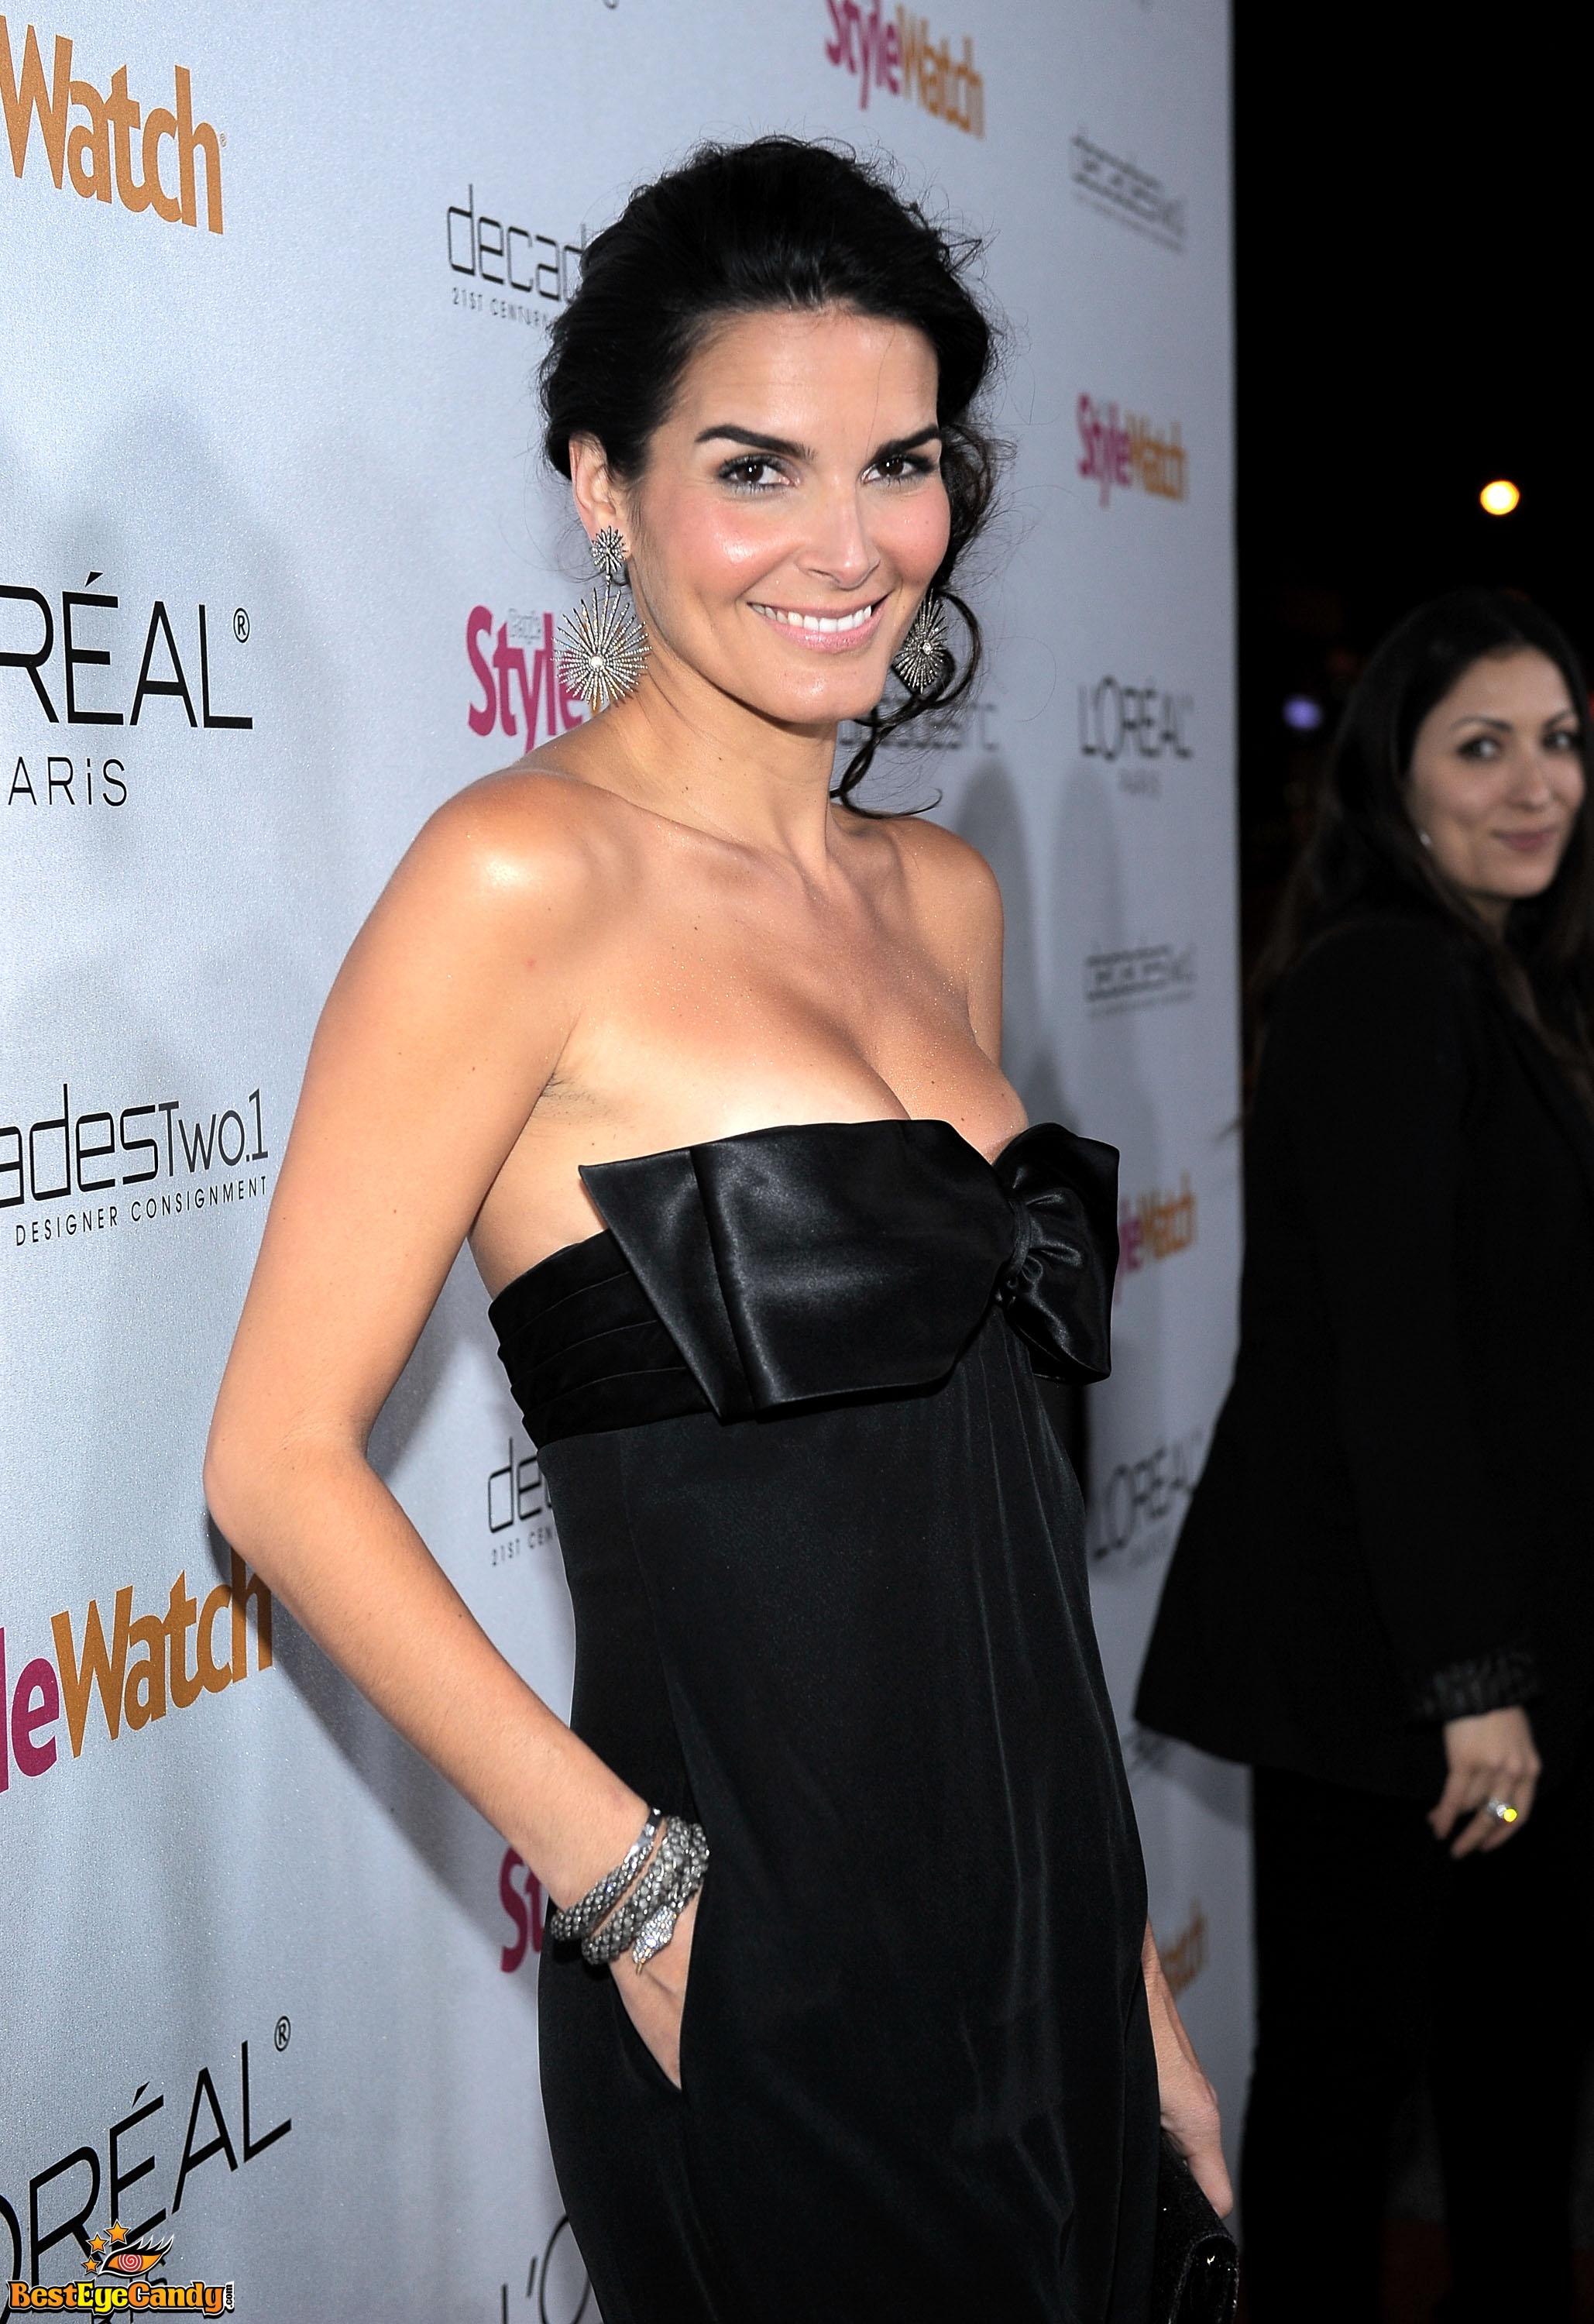 Angie_Harmon_--_Mix_Of_Events_037.jpg